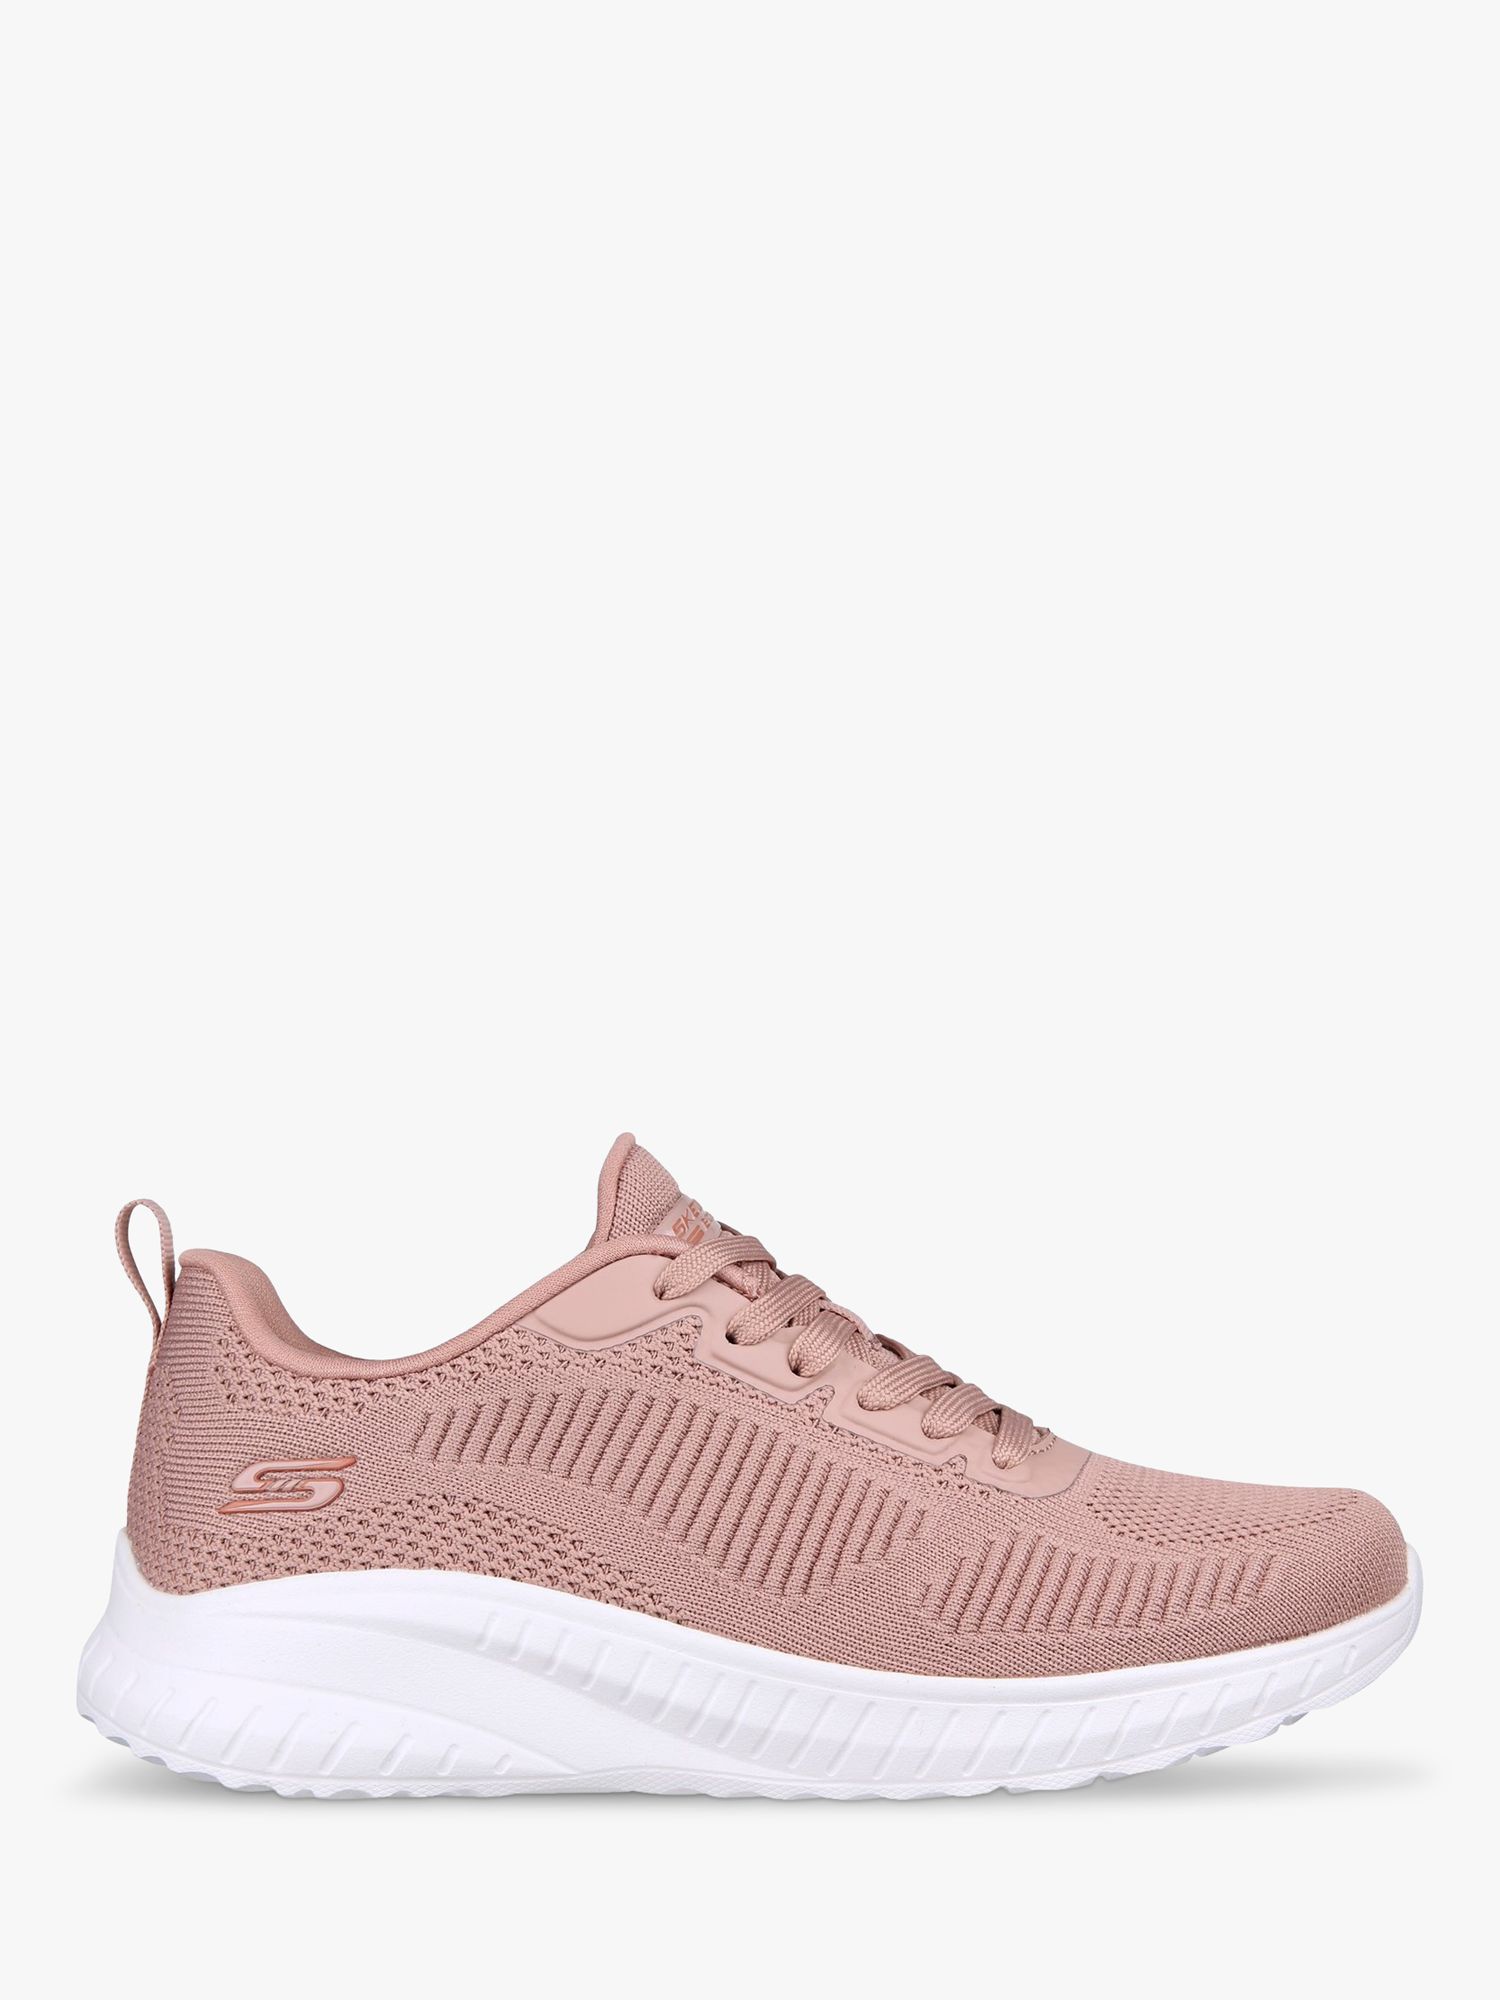 Skechers Bob Squad Chaos Face Off Trainers, Pink at John Lewis & Partners